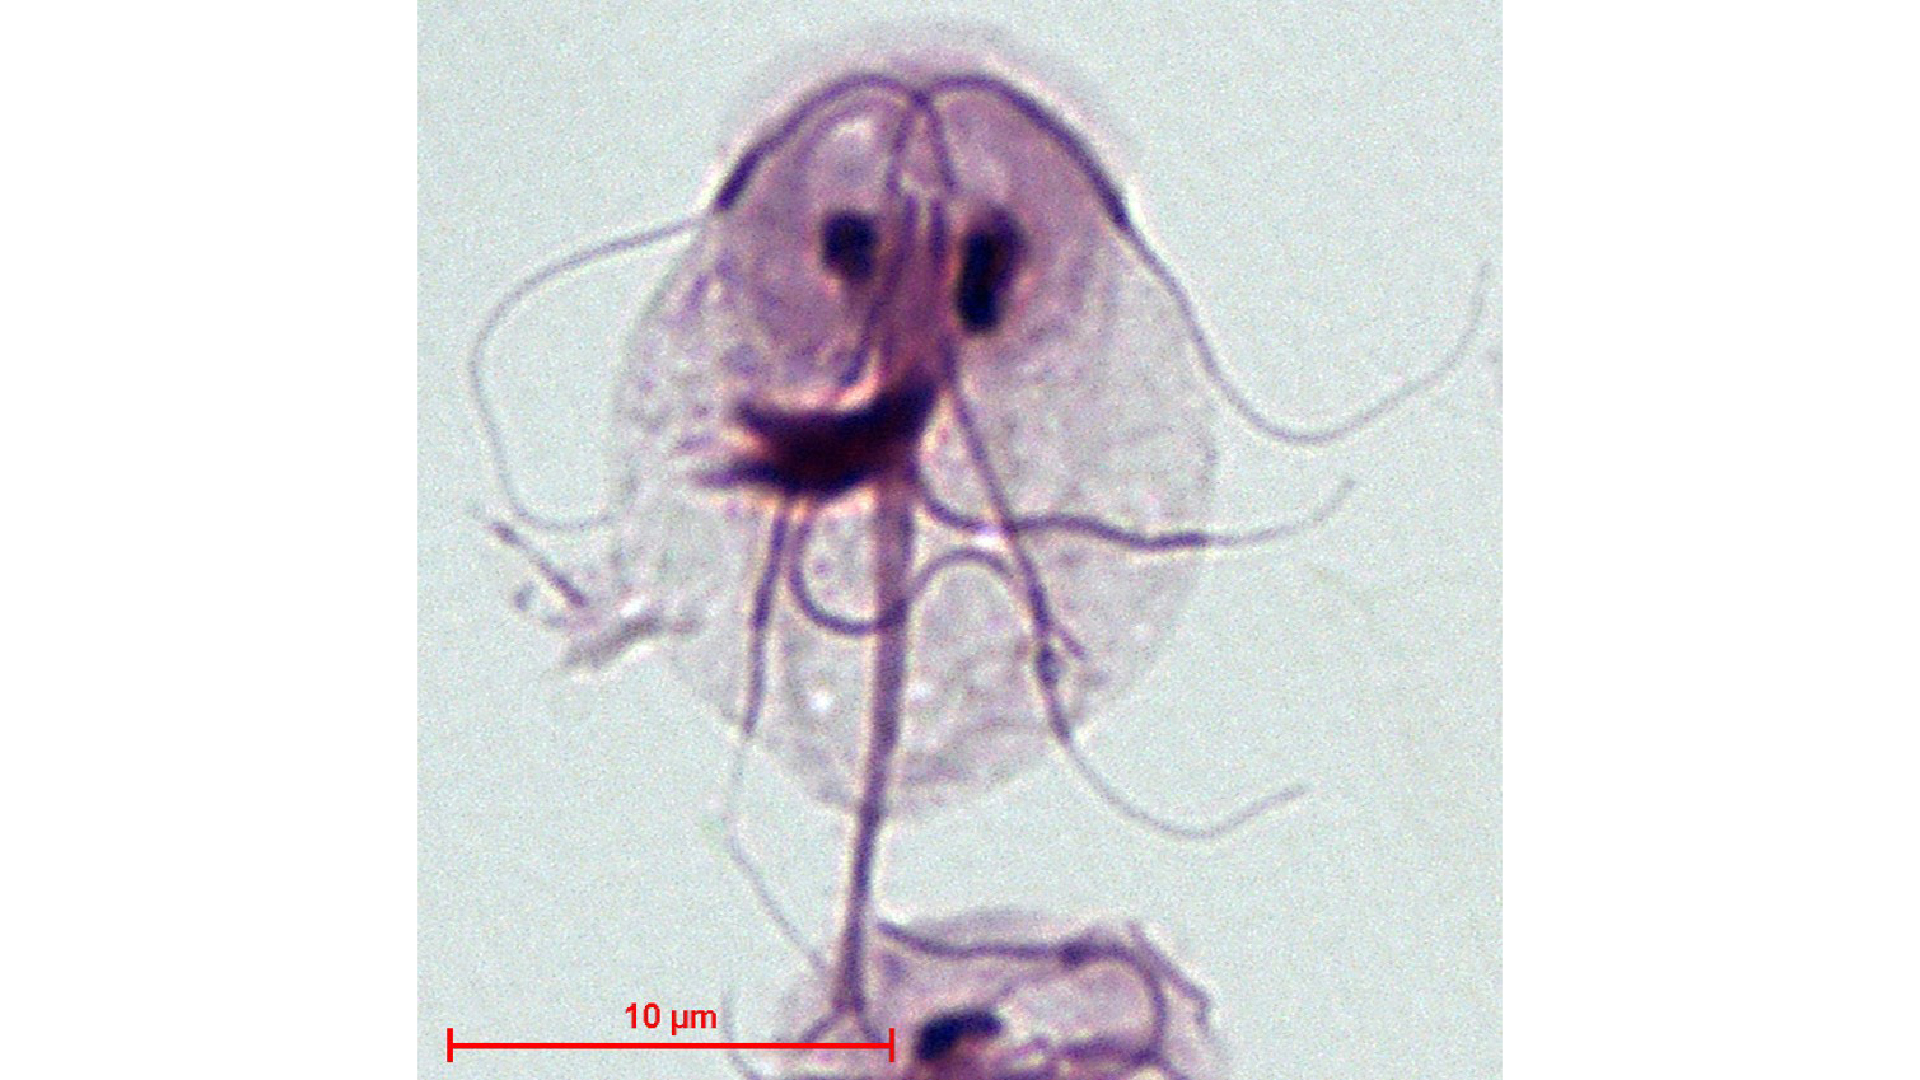 A microscopic image of giardia intestinalis. The nucleus, flagella, parabasal body, and axonemes are visible.